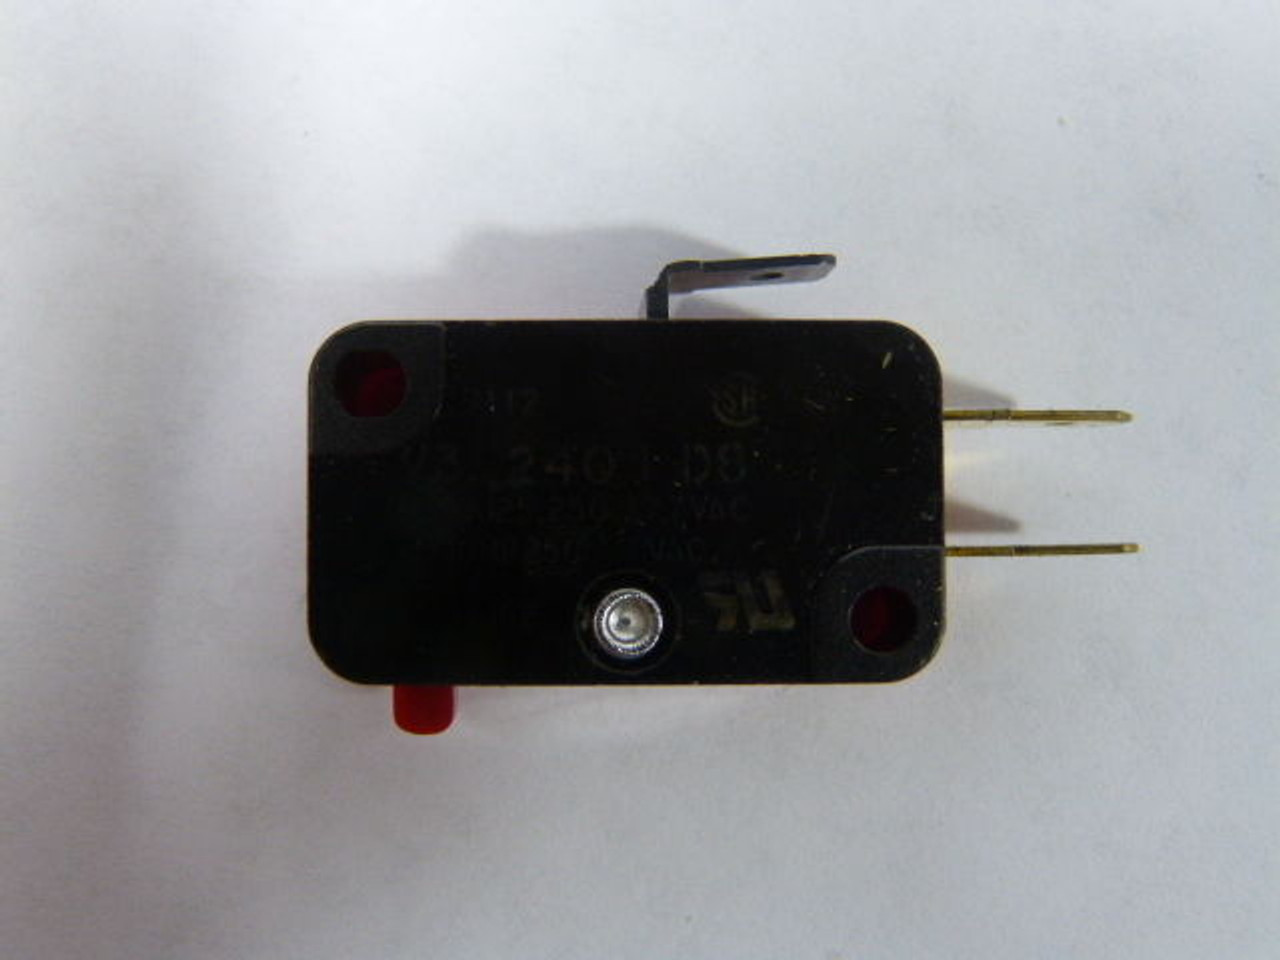 Microswitch V3-2401-D8 Snap Action Plunger Limit Switch 5A 277V USED